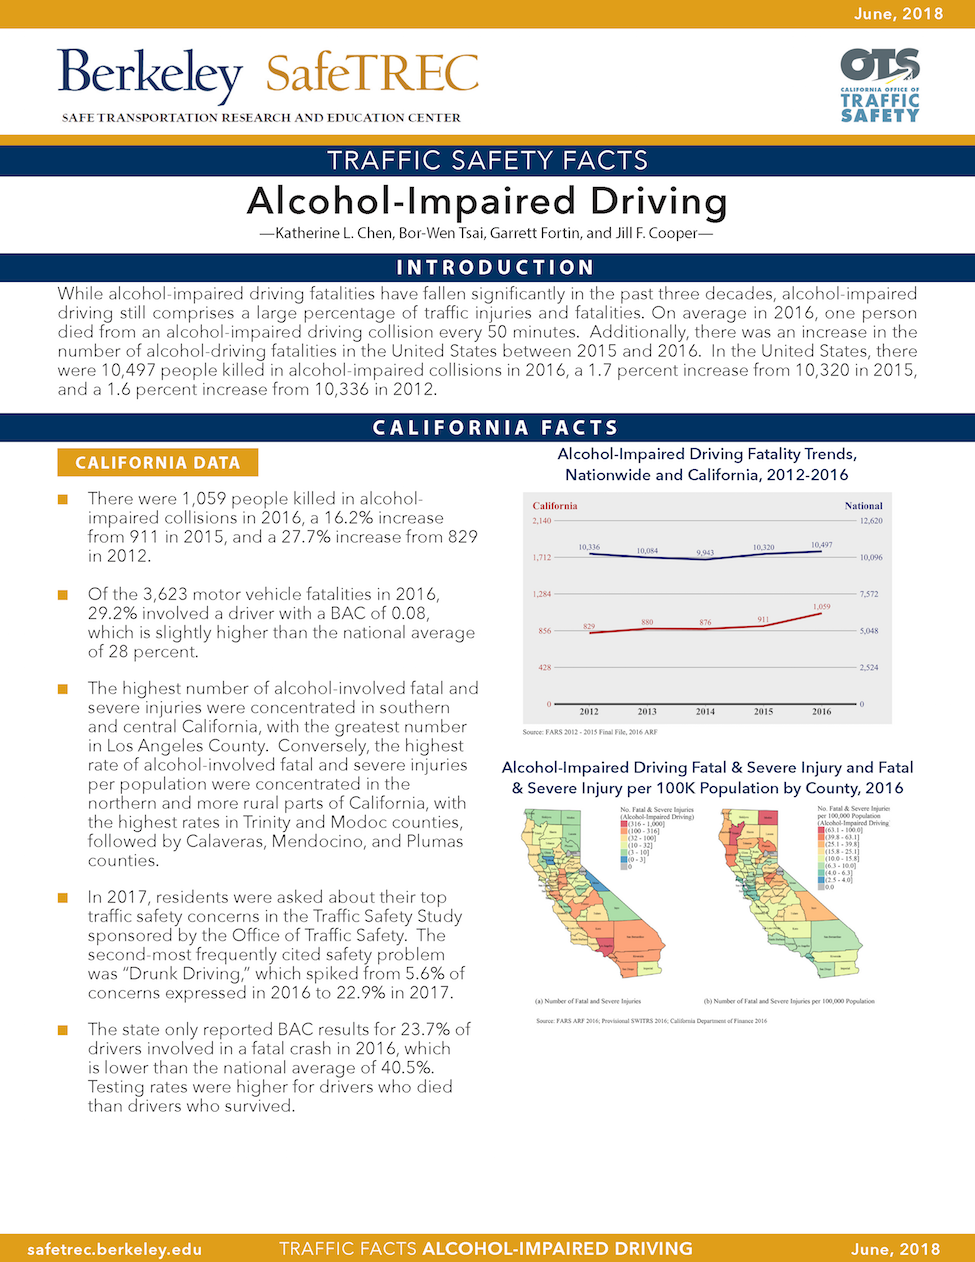 Alcohol-Impaired Driving Fact Sheet